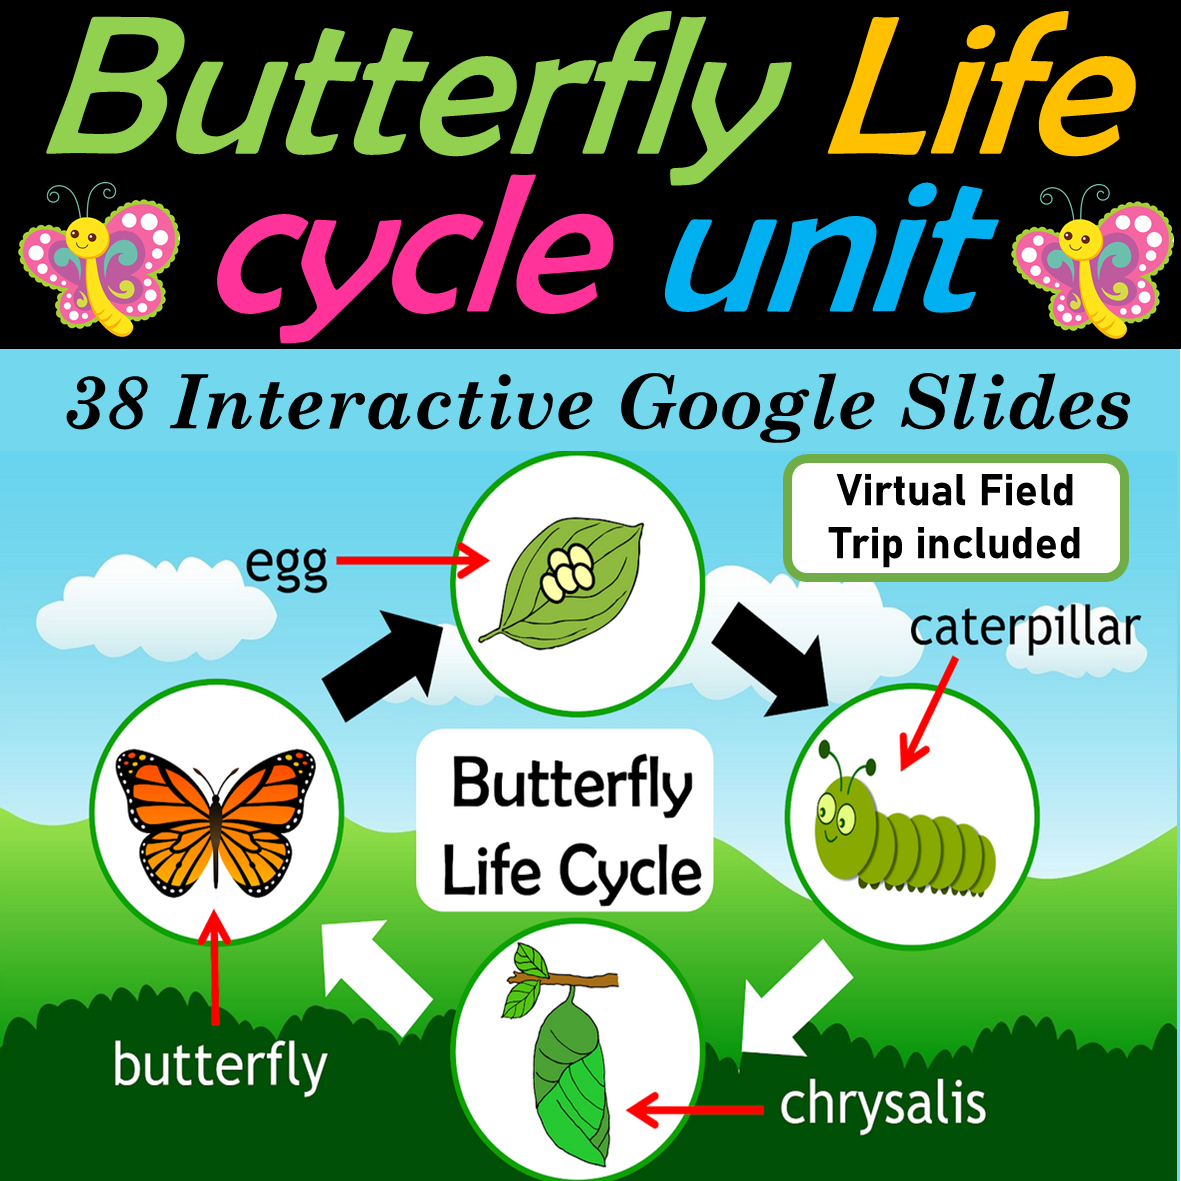 Butterfly Life Cycle, Virtual field trip to Butterfly conservatory | Digital- 35 Google Slides